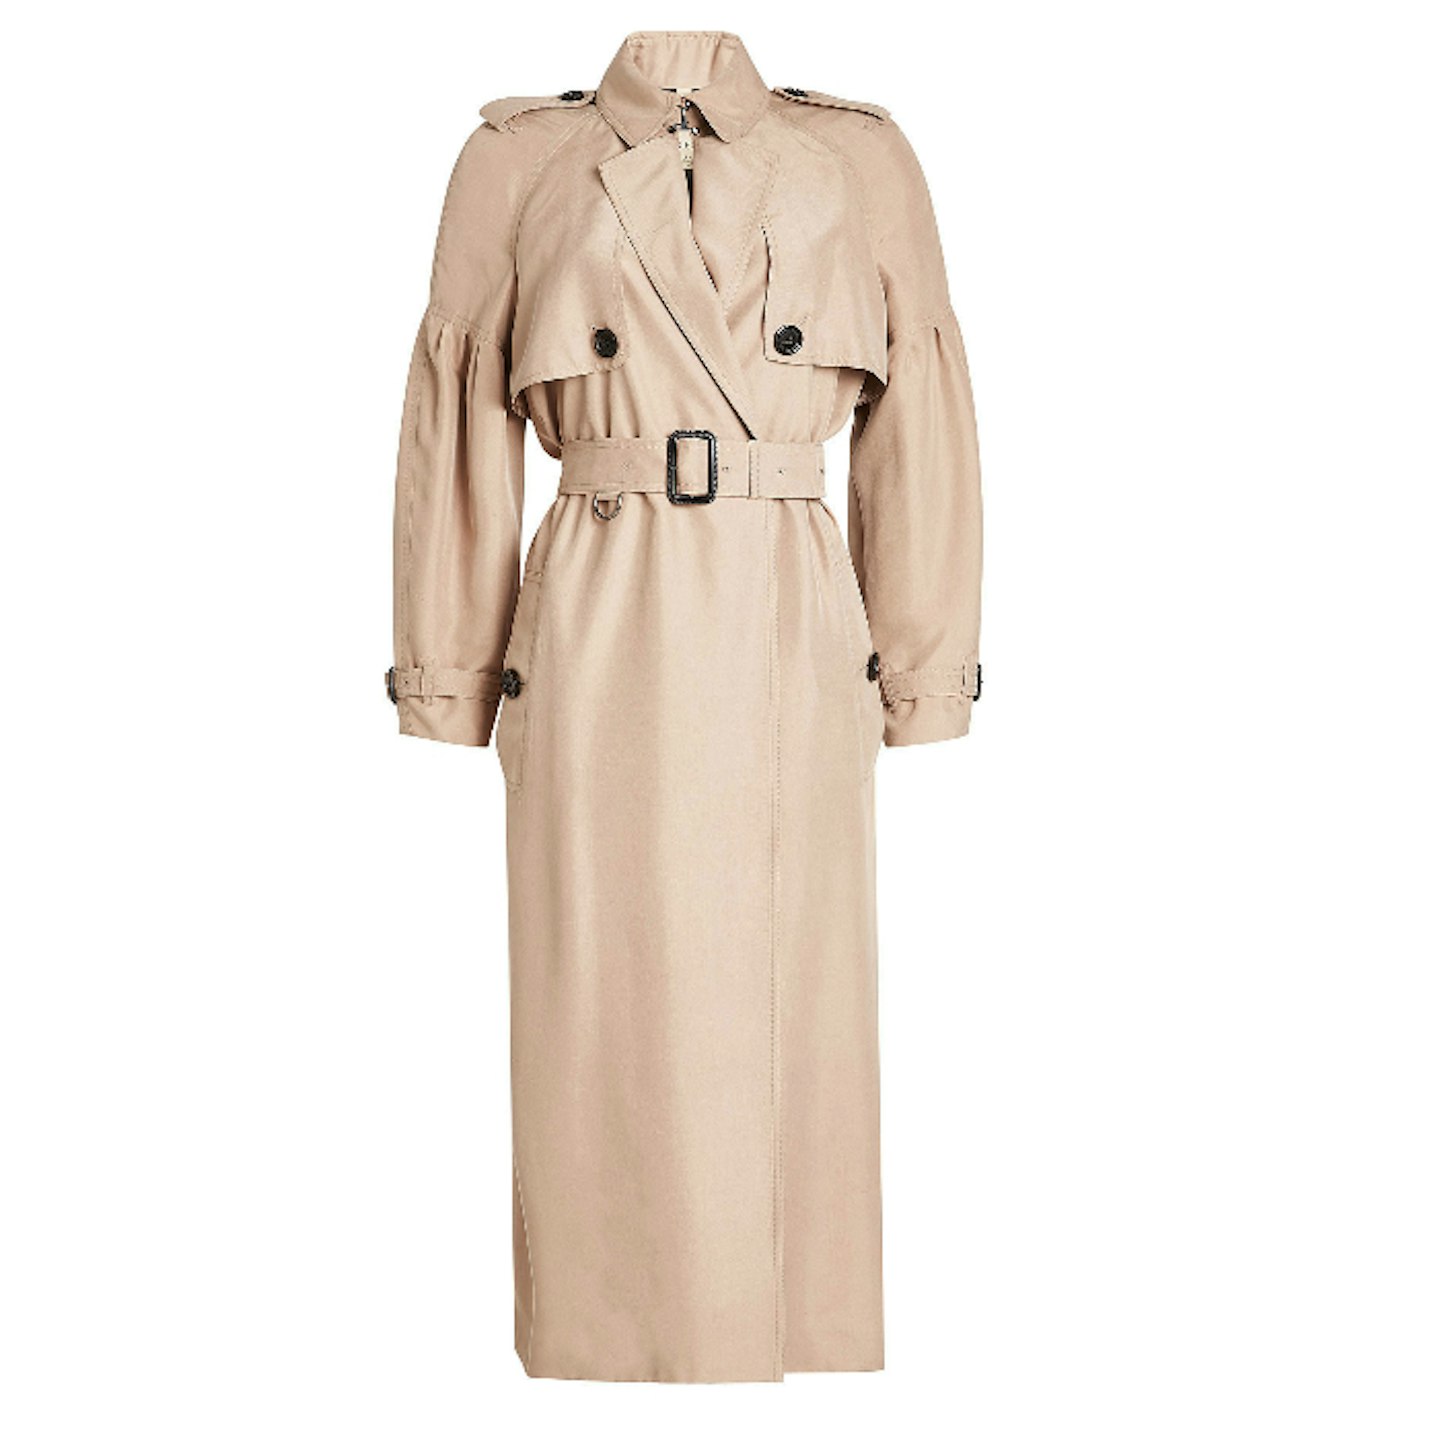 burberry silk trench coat airport style